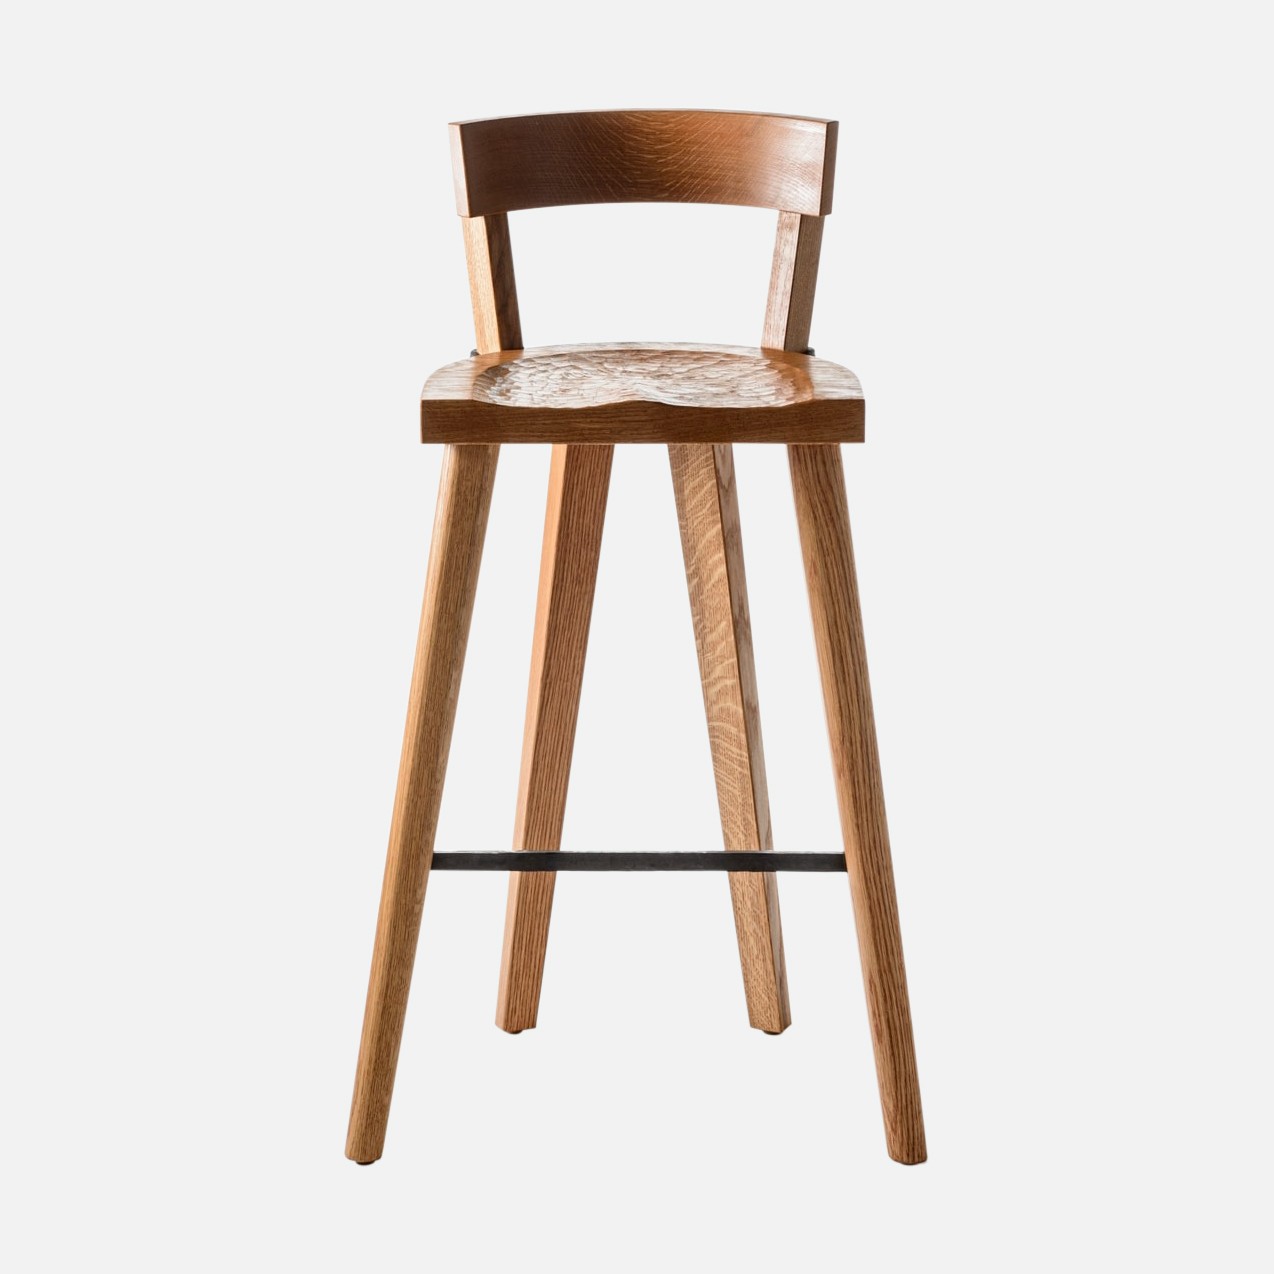 a wooden stool with a wooden seat on a white background